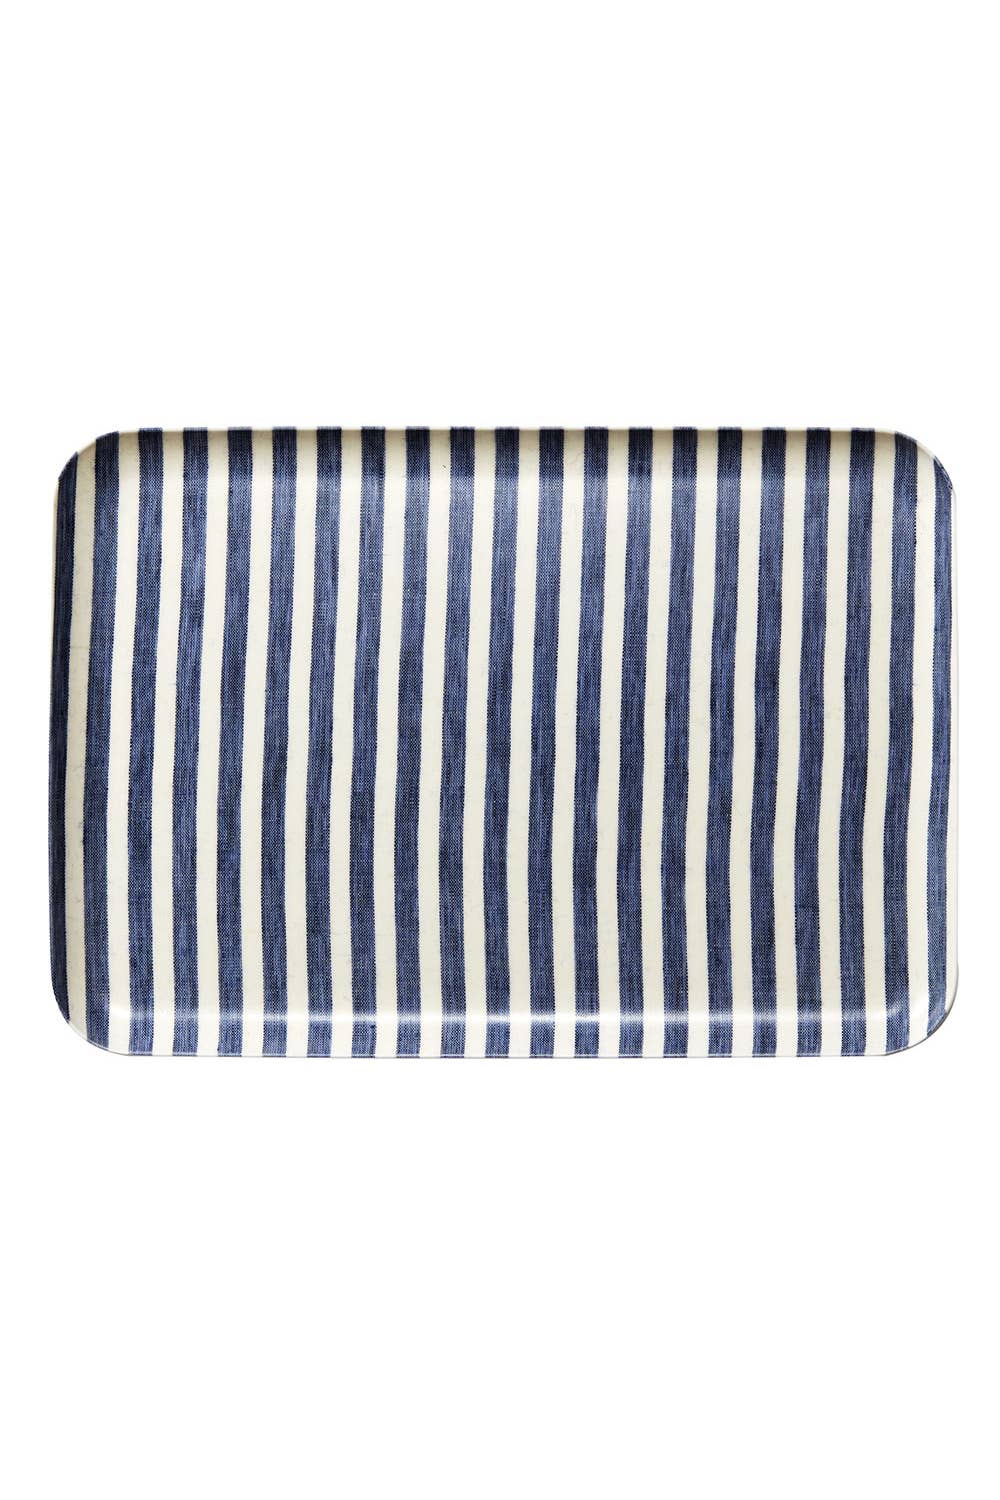 Blue Striped Linen Coating Tray